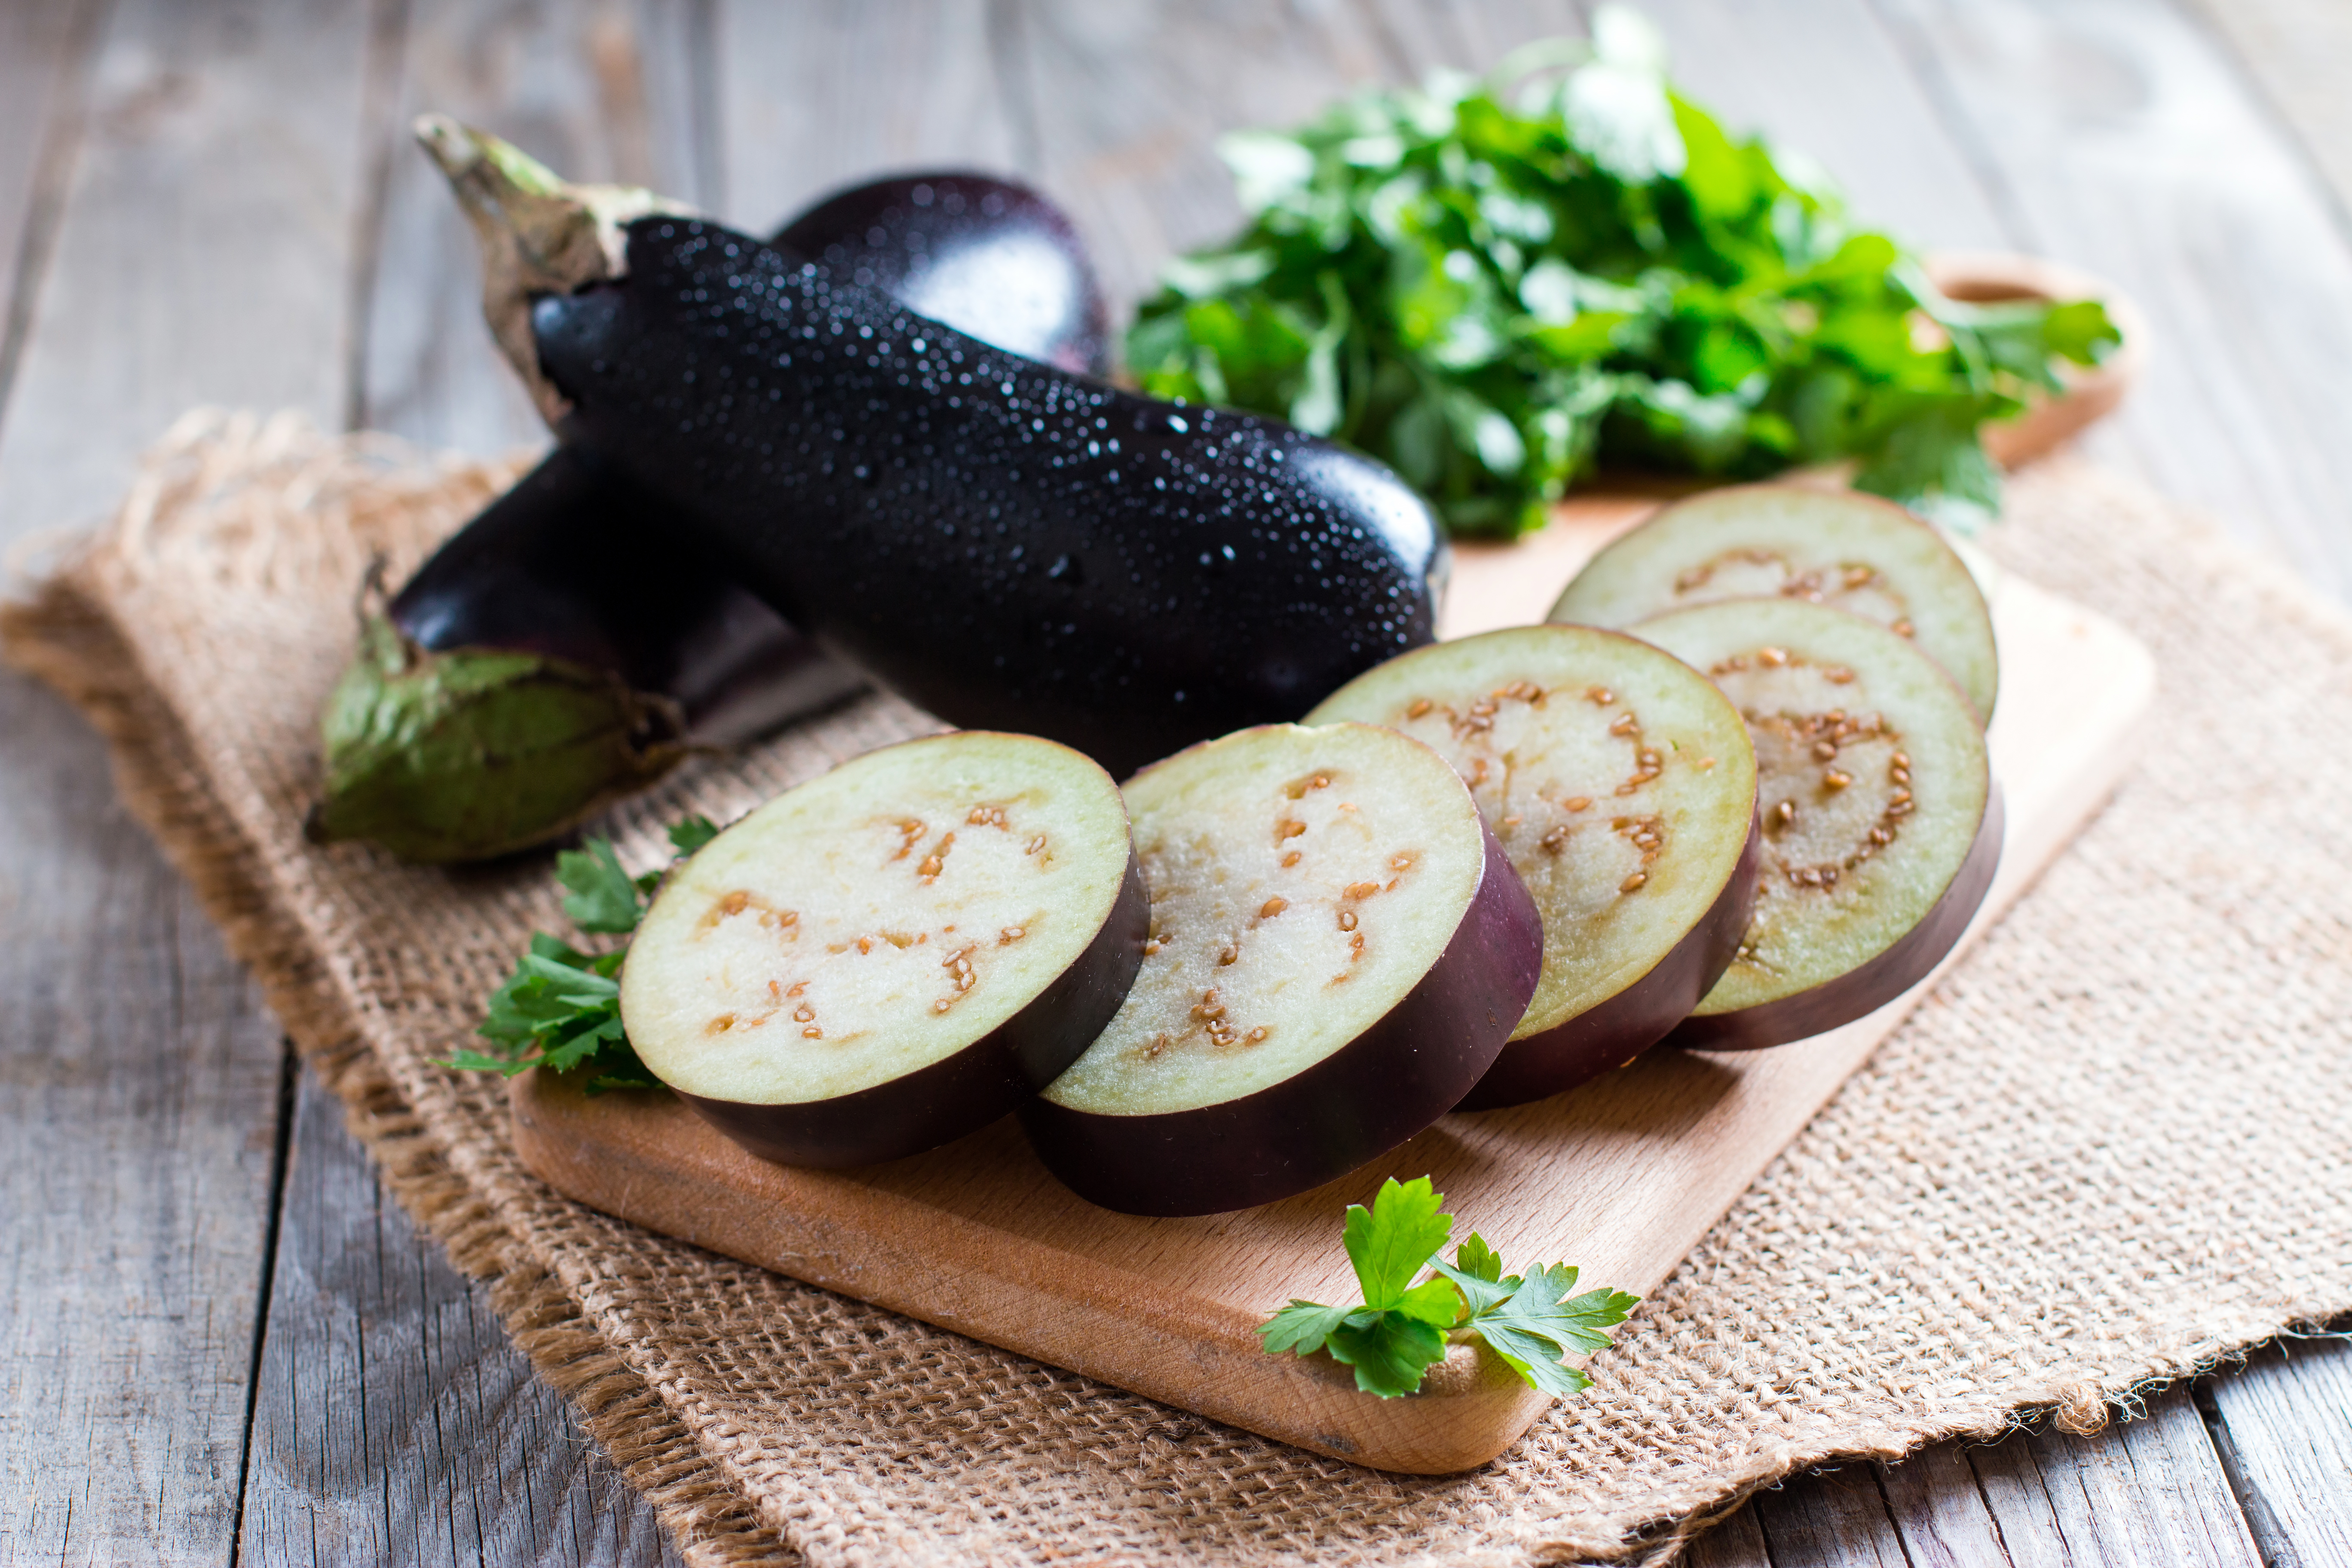 How To Tell When An Eggplant Is Ripe 